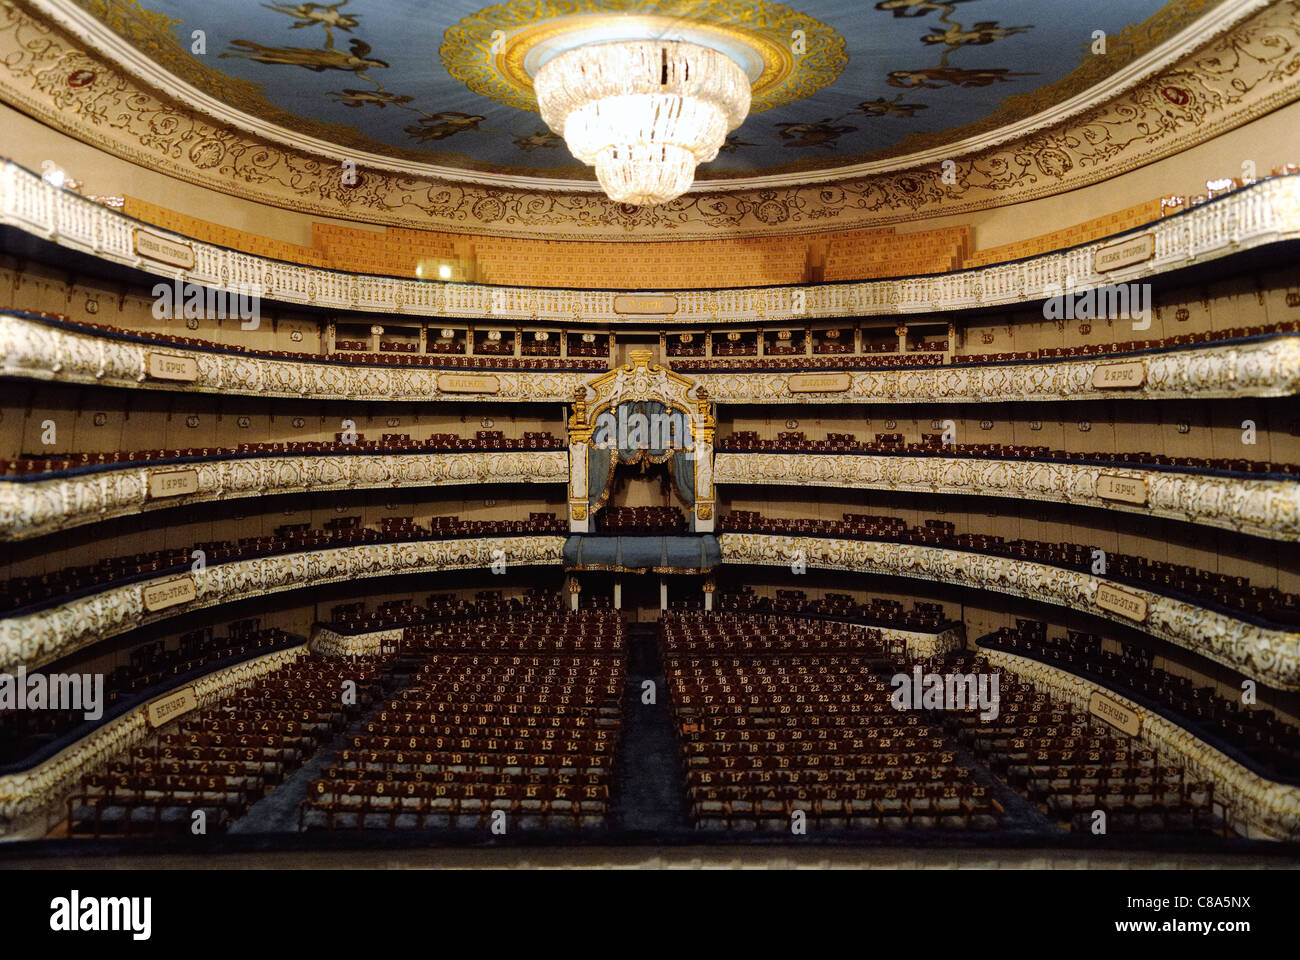 The five-tiered auditorium of the Mariinsky Theatre, model, St. Petersburg, Russia Stock Photo